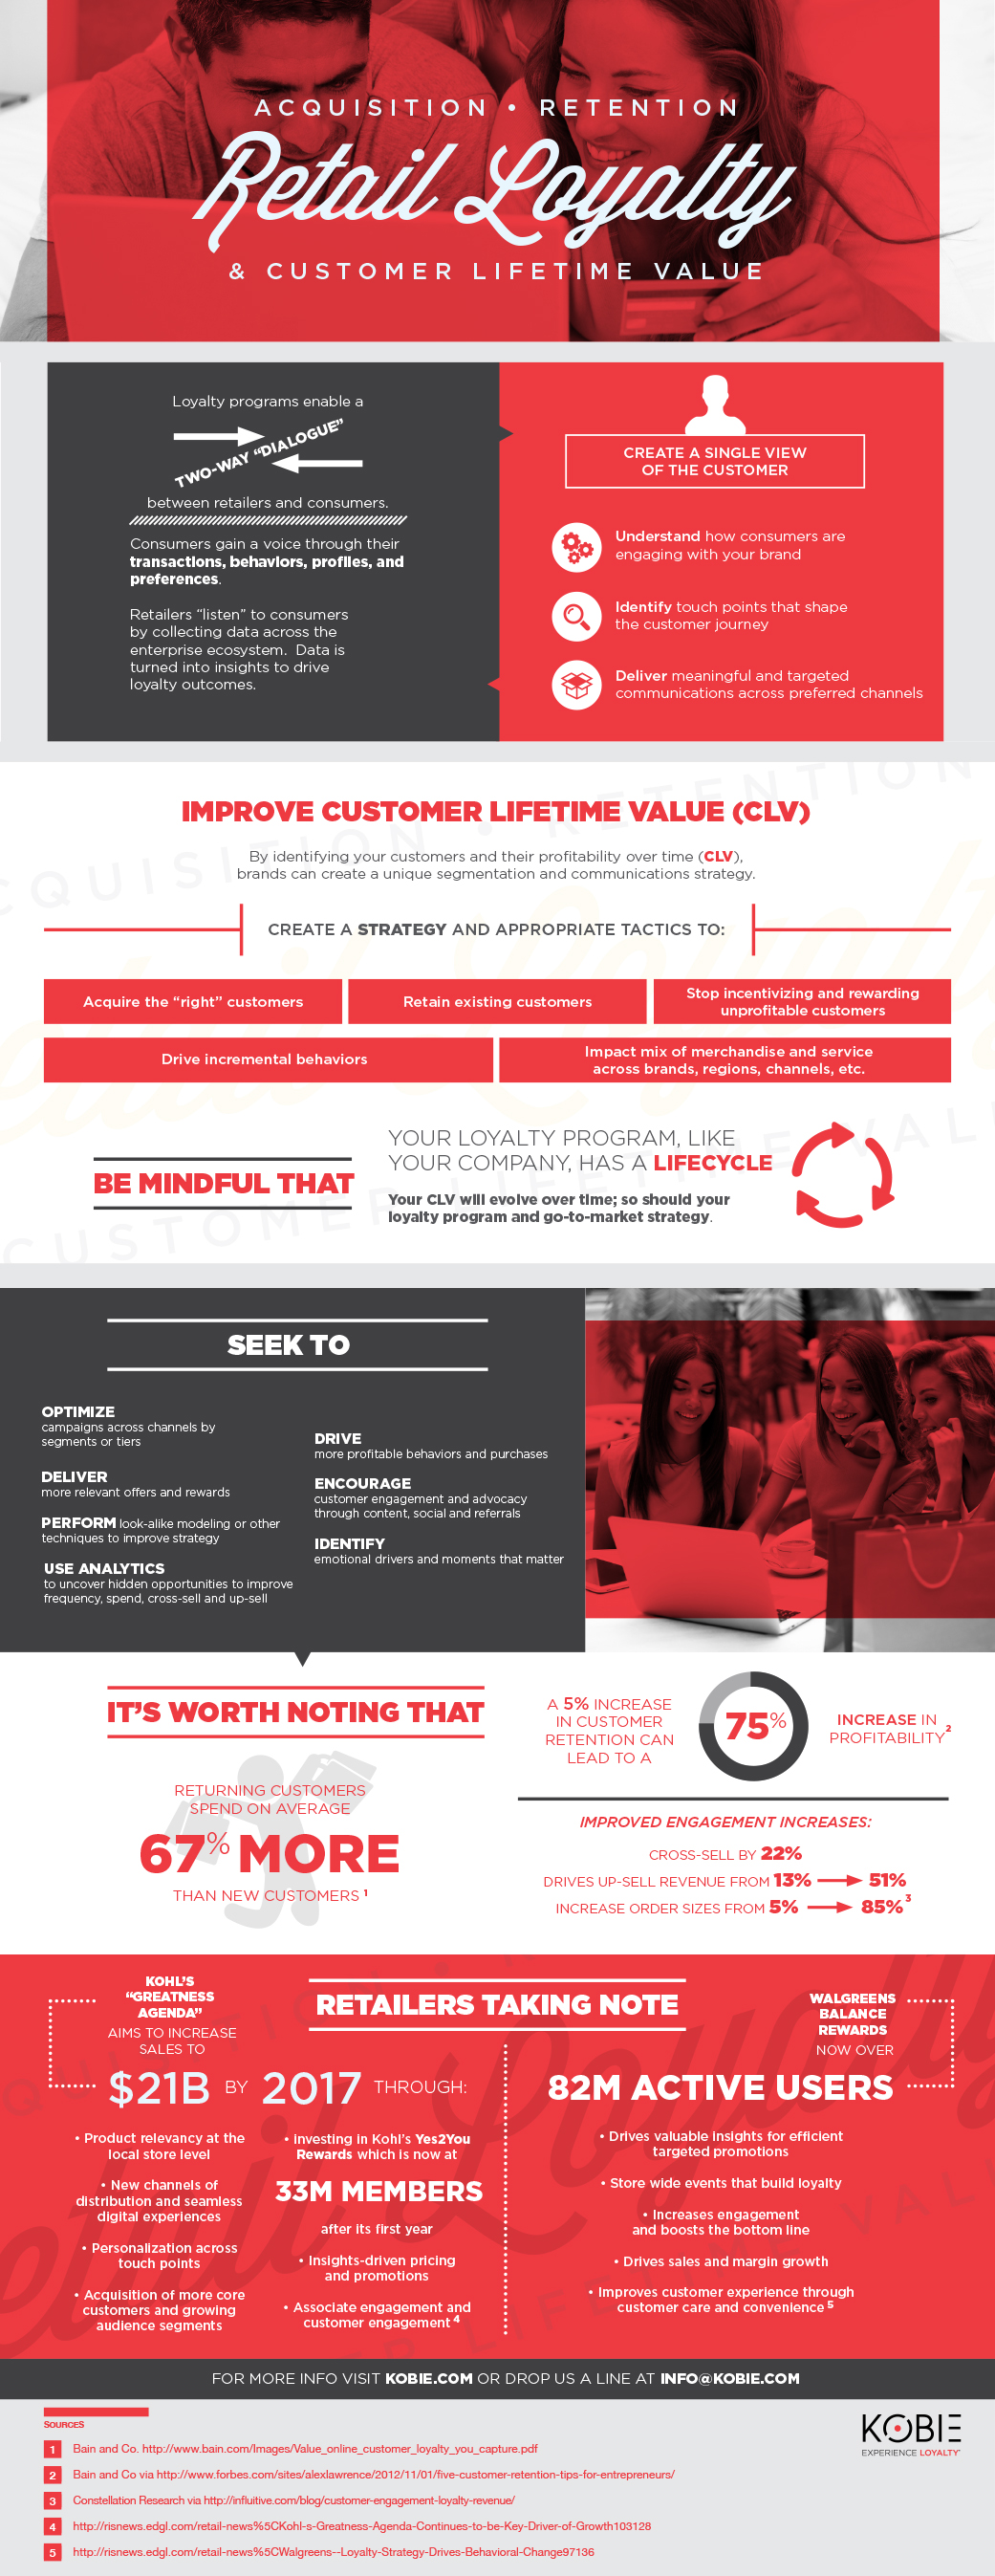 Retail Loyalty: Acquisition, Retention and Customer Lifetime Value